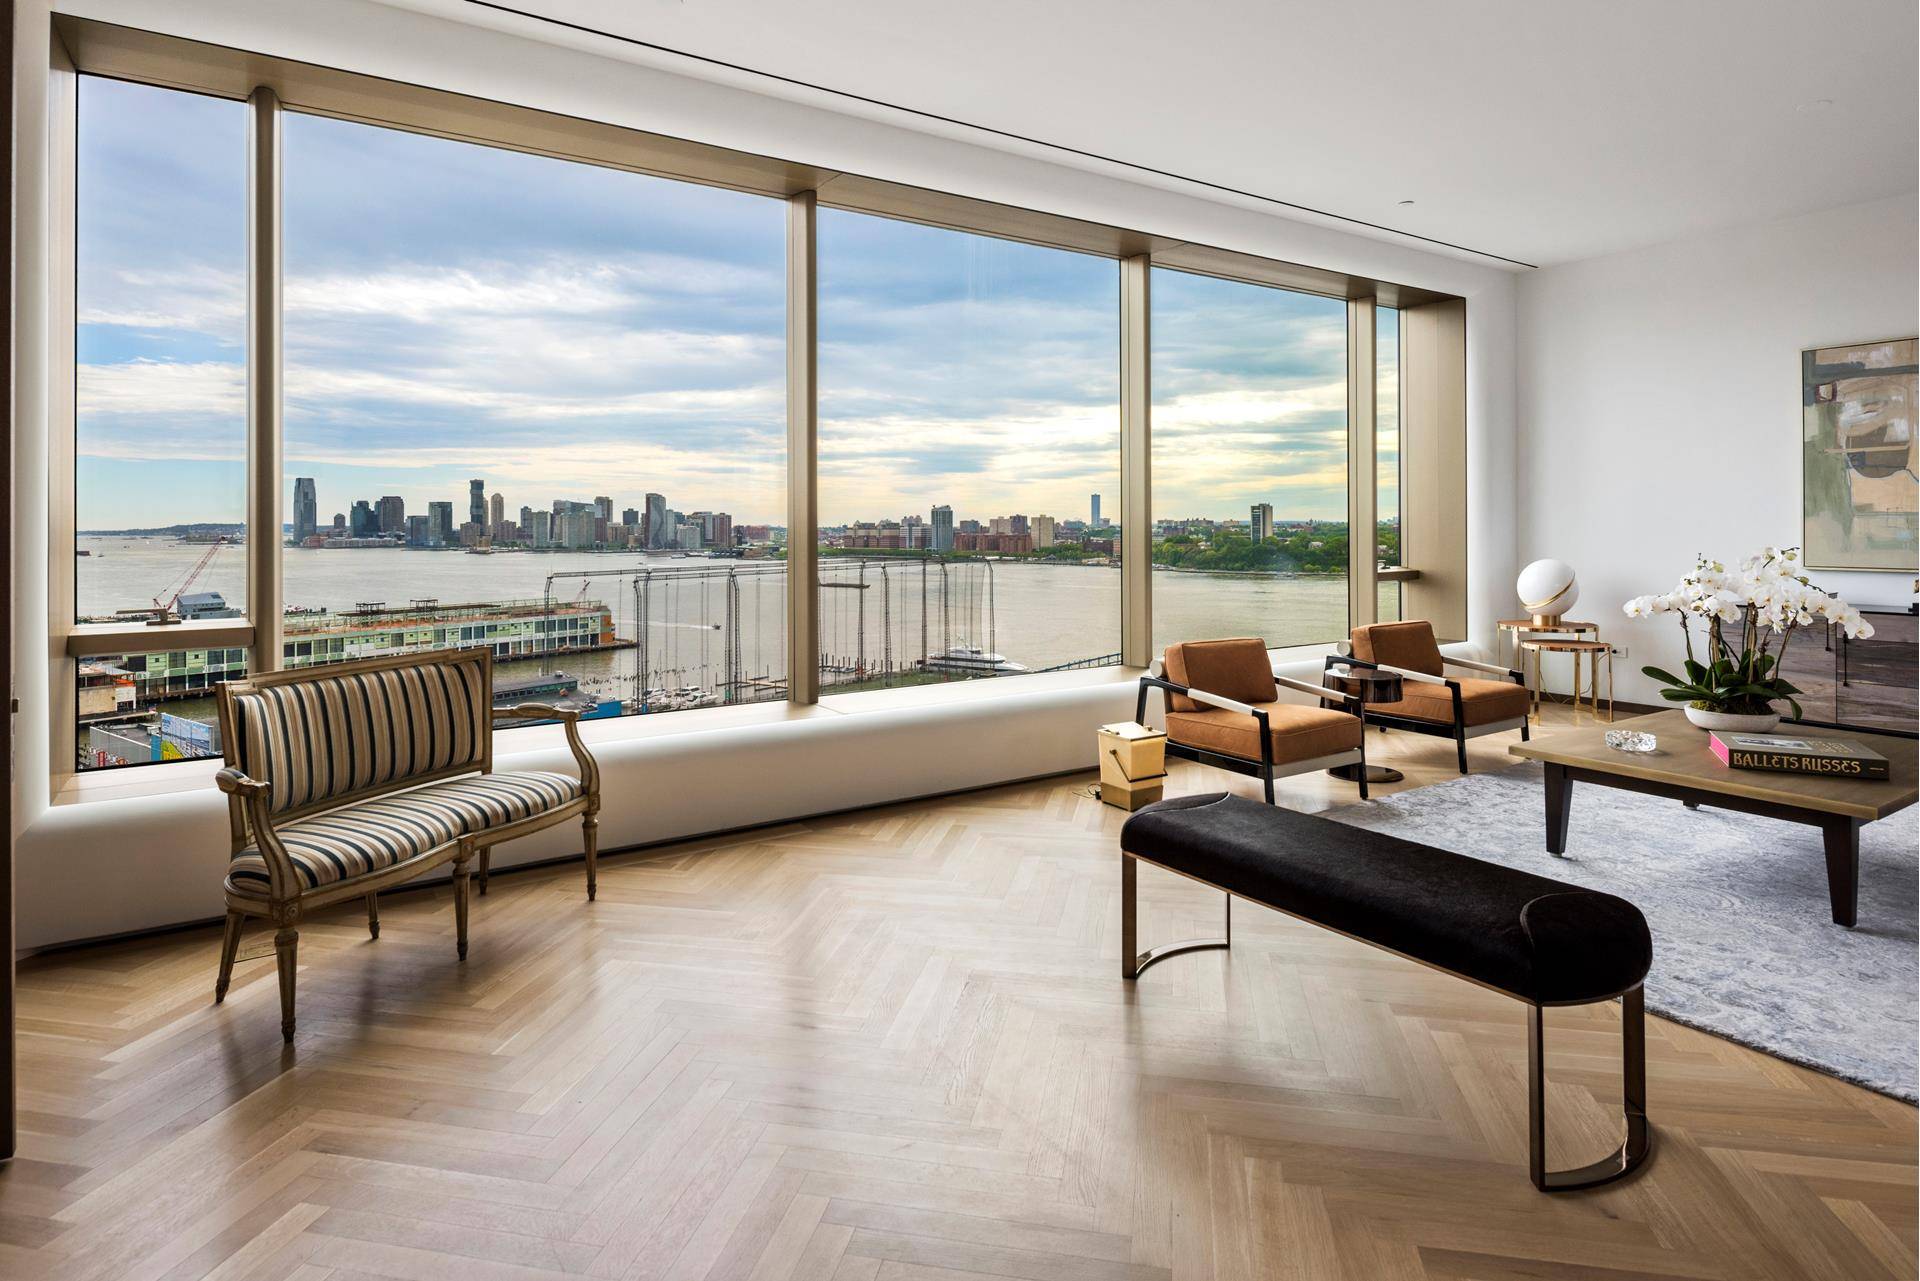 Enjoy the breathtaking Manhattan views from this gracious 3, 860 square foot, 3 bedroom, 3.